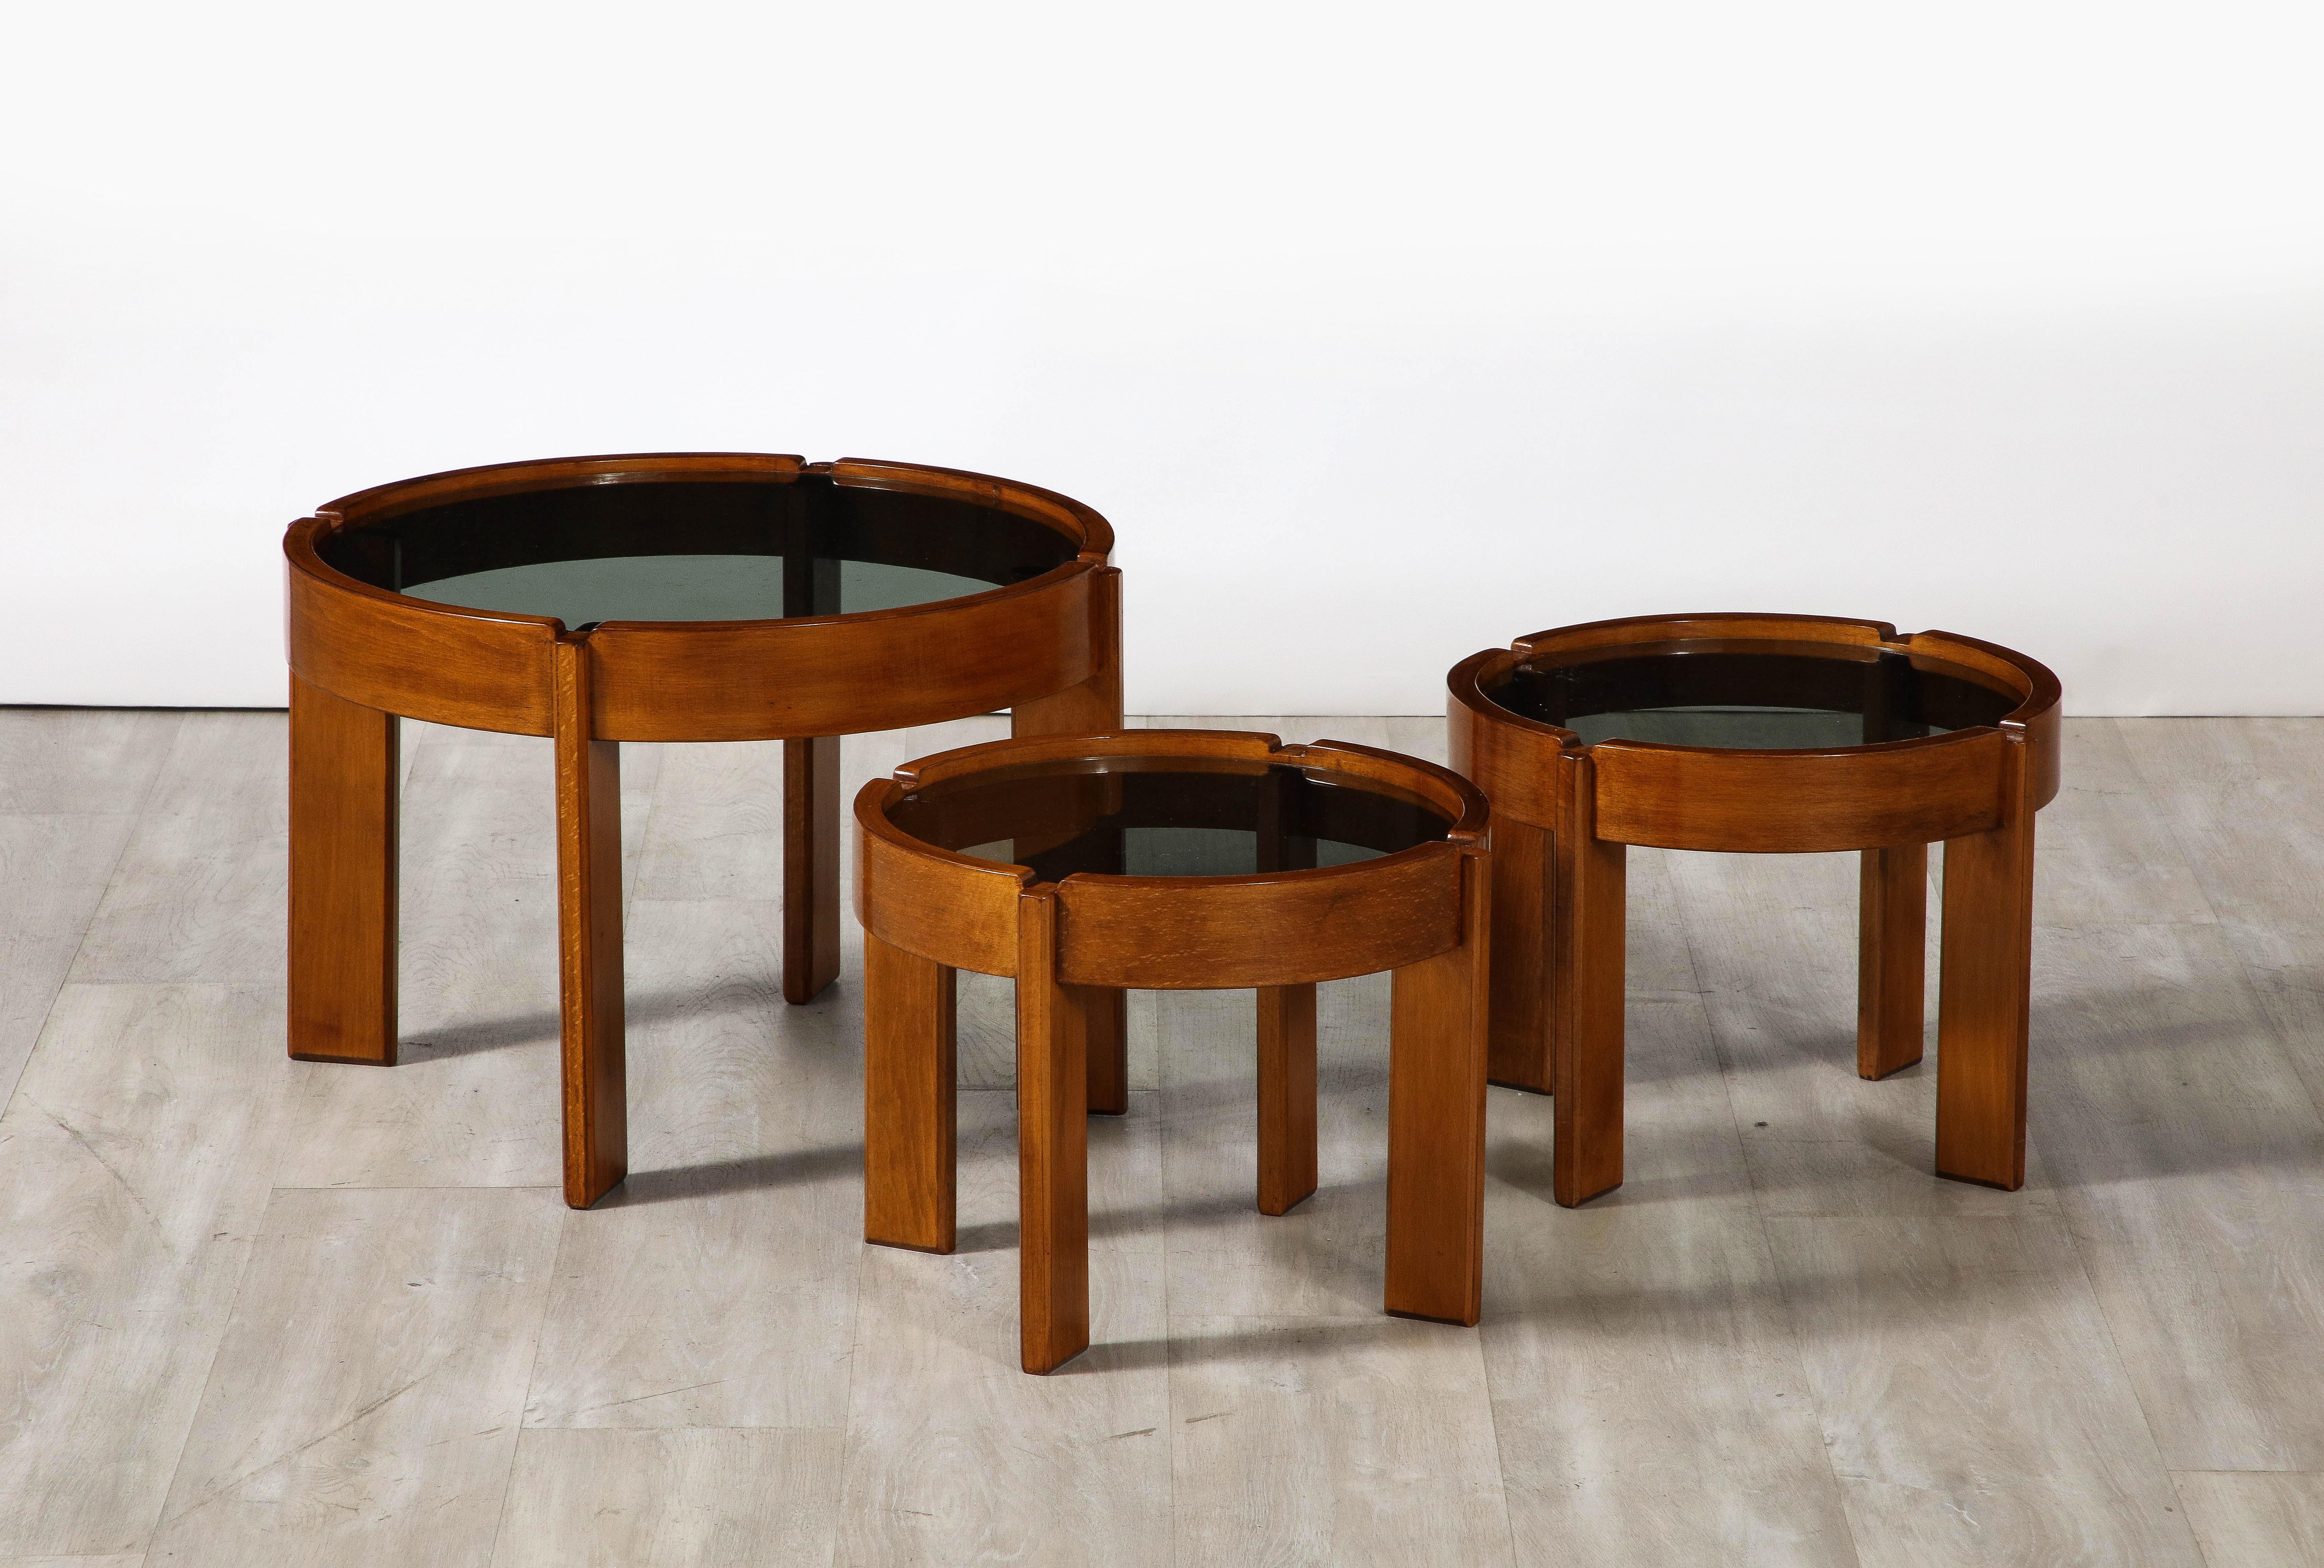 Mid-Century Modern Gianfranco Frattini for Cassina Set of 3 Smoked Glass and Walnut Tables, ca 1967